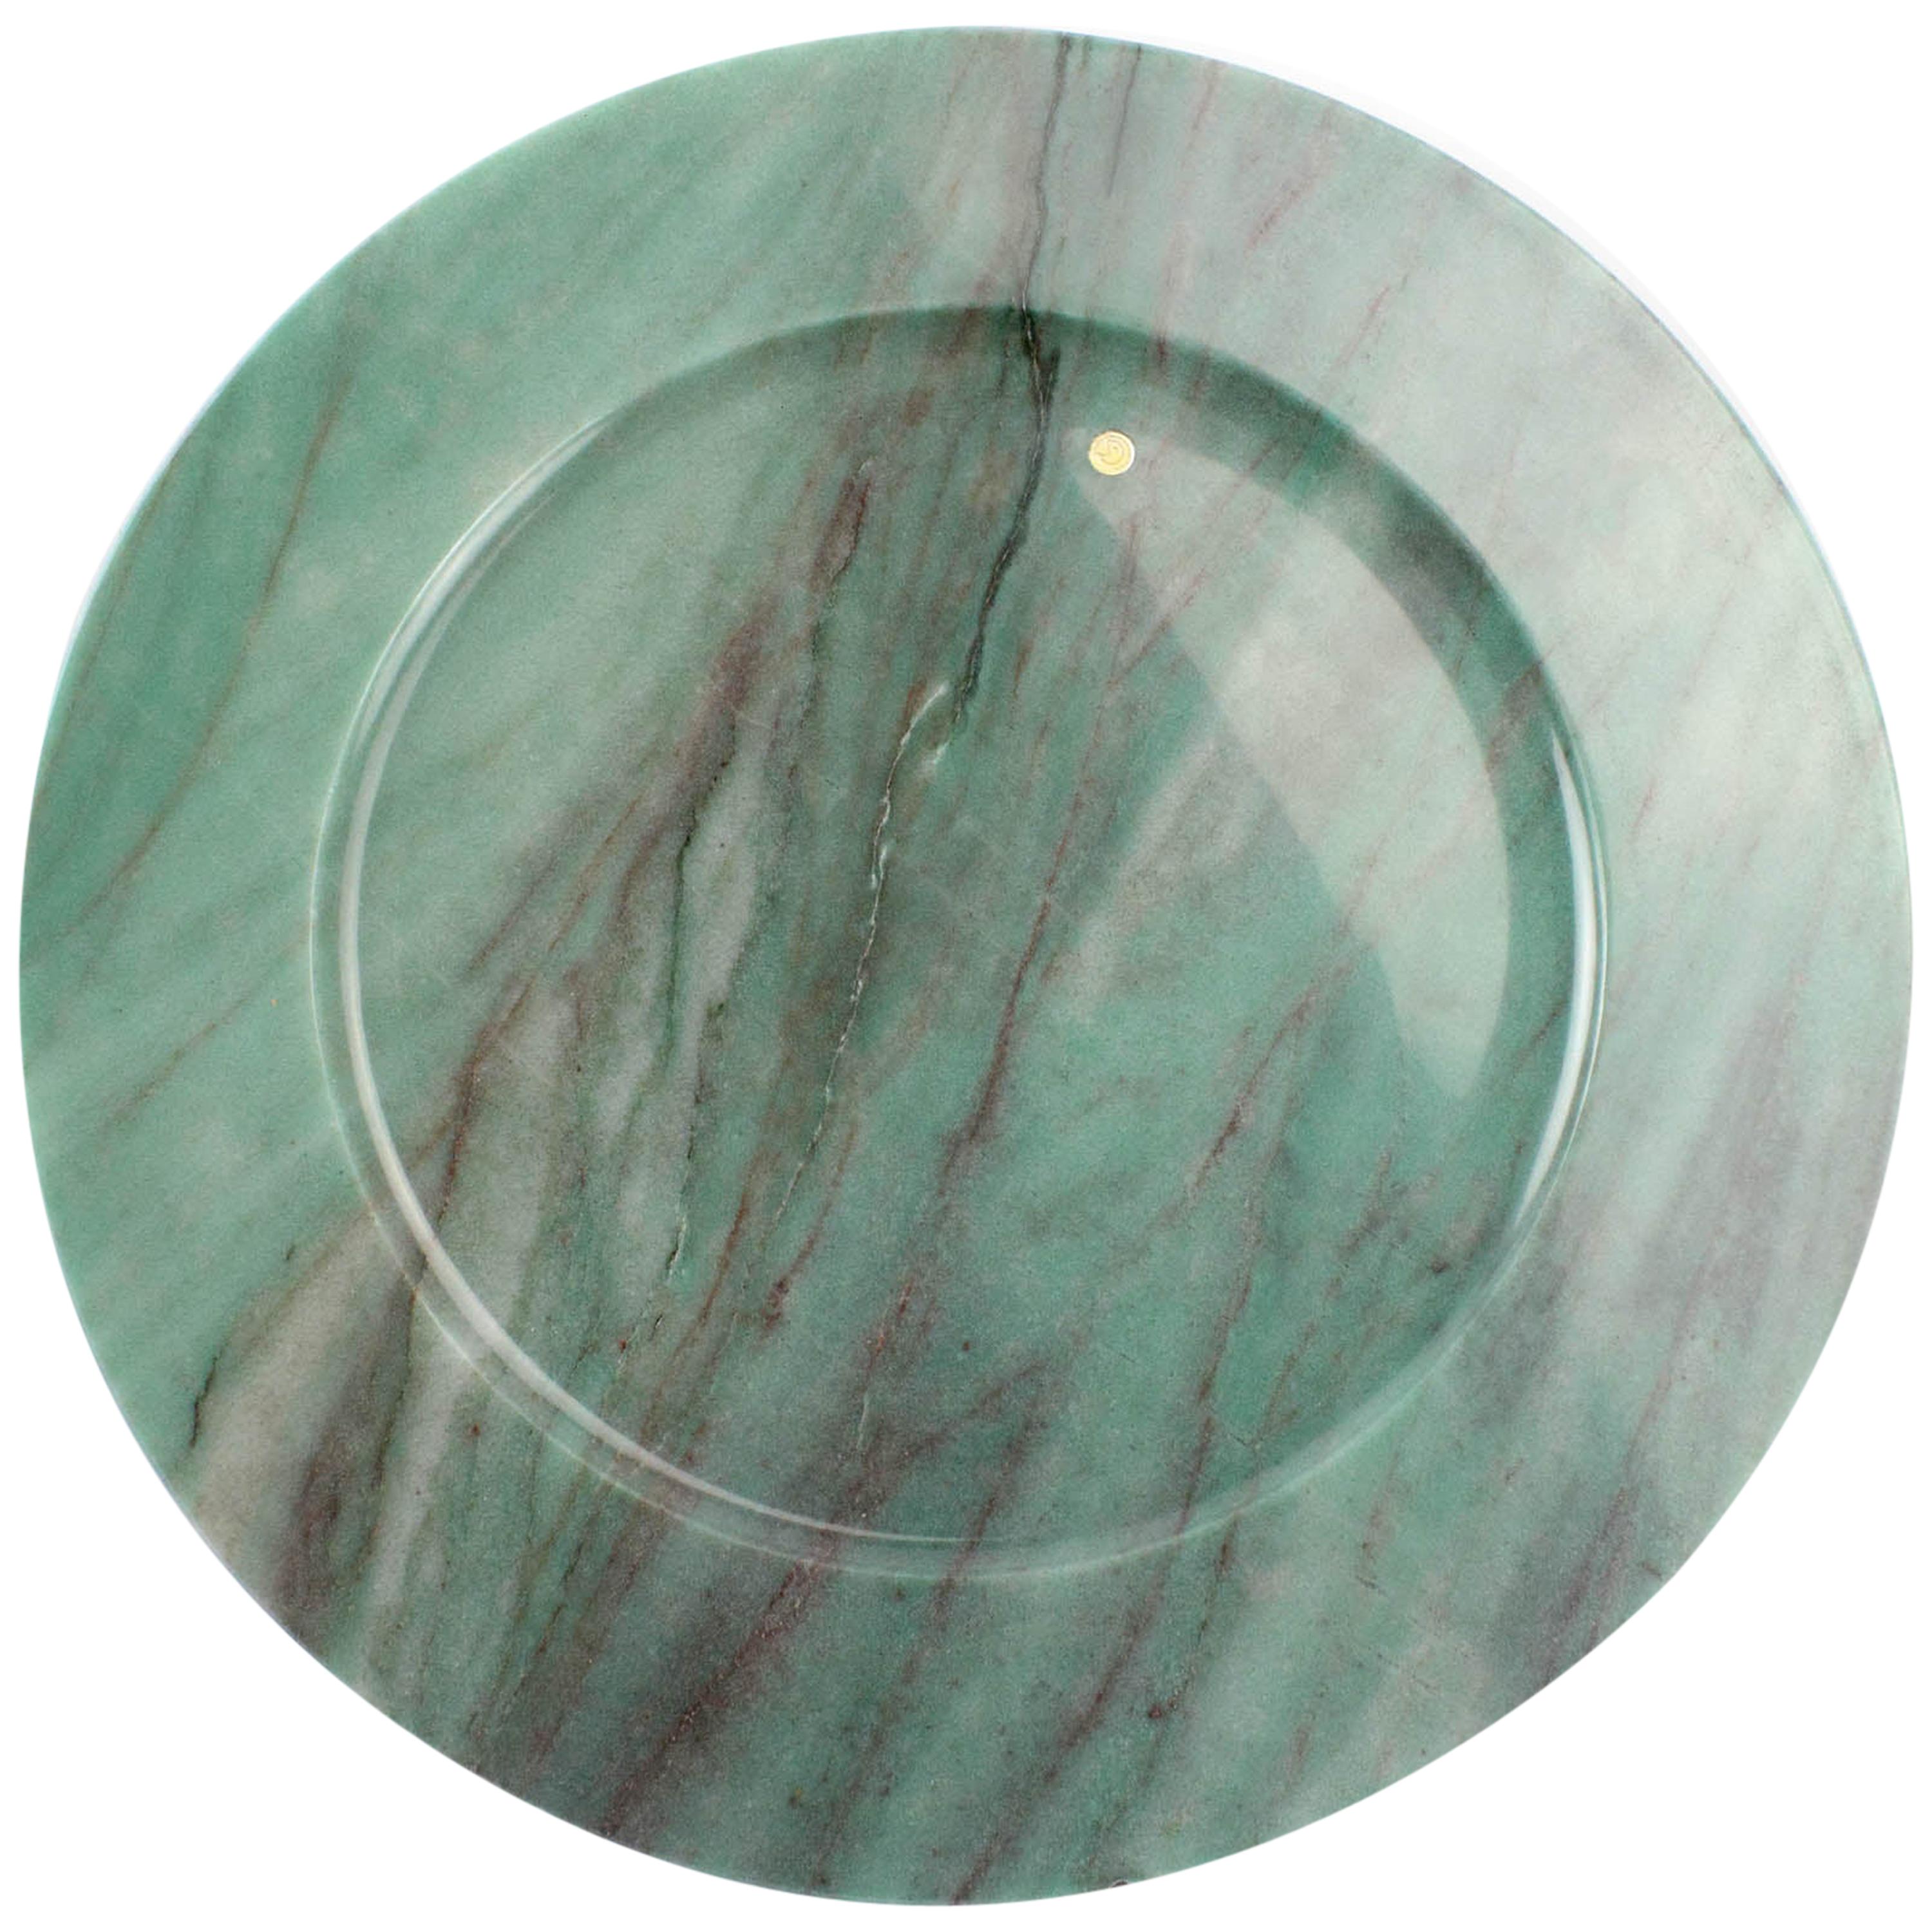 Charger Plate Platters Serveware Green Quartzite Marble Collectible Design Italy For Sale